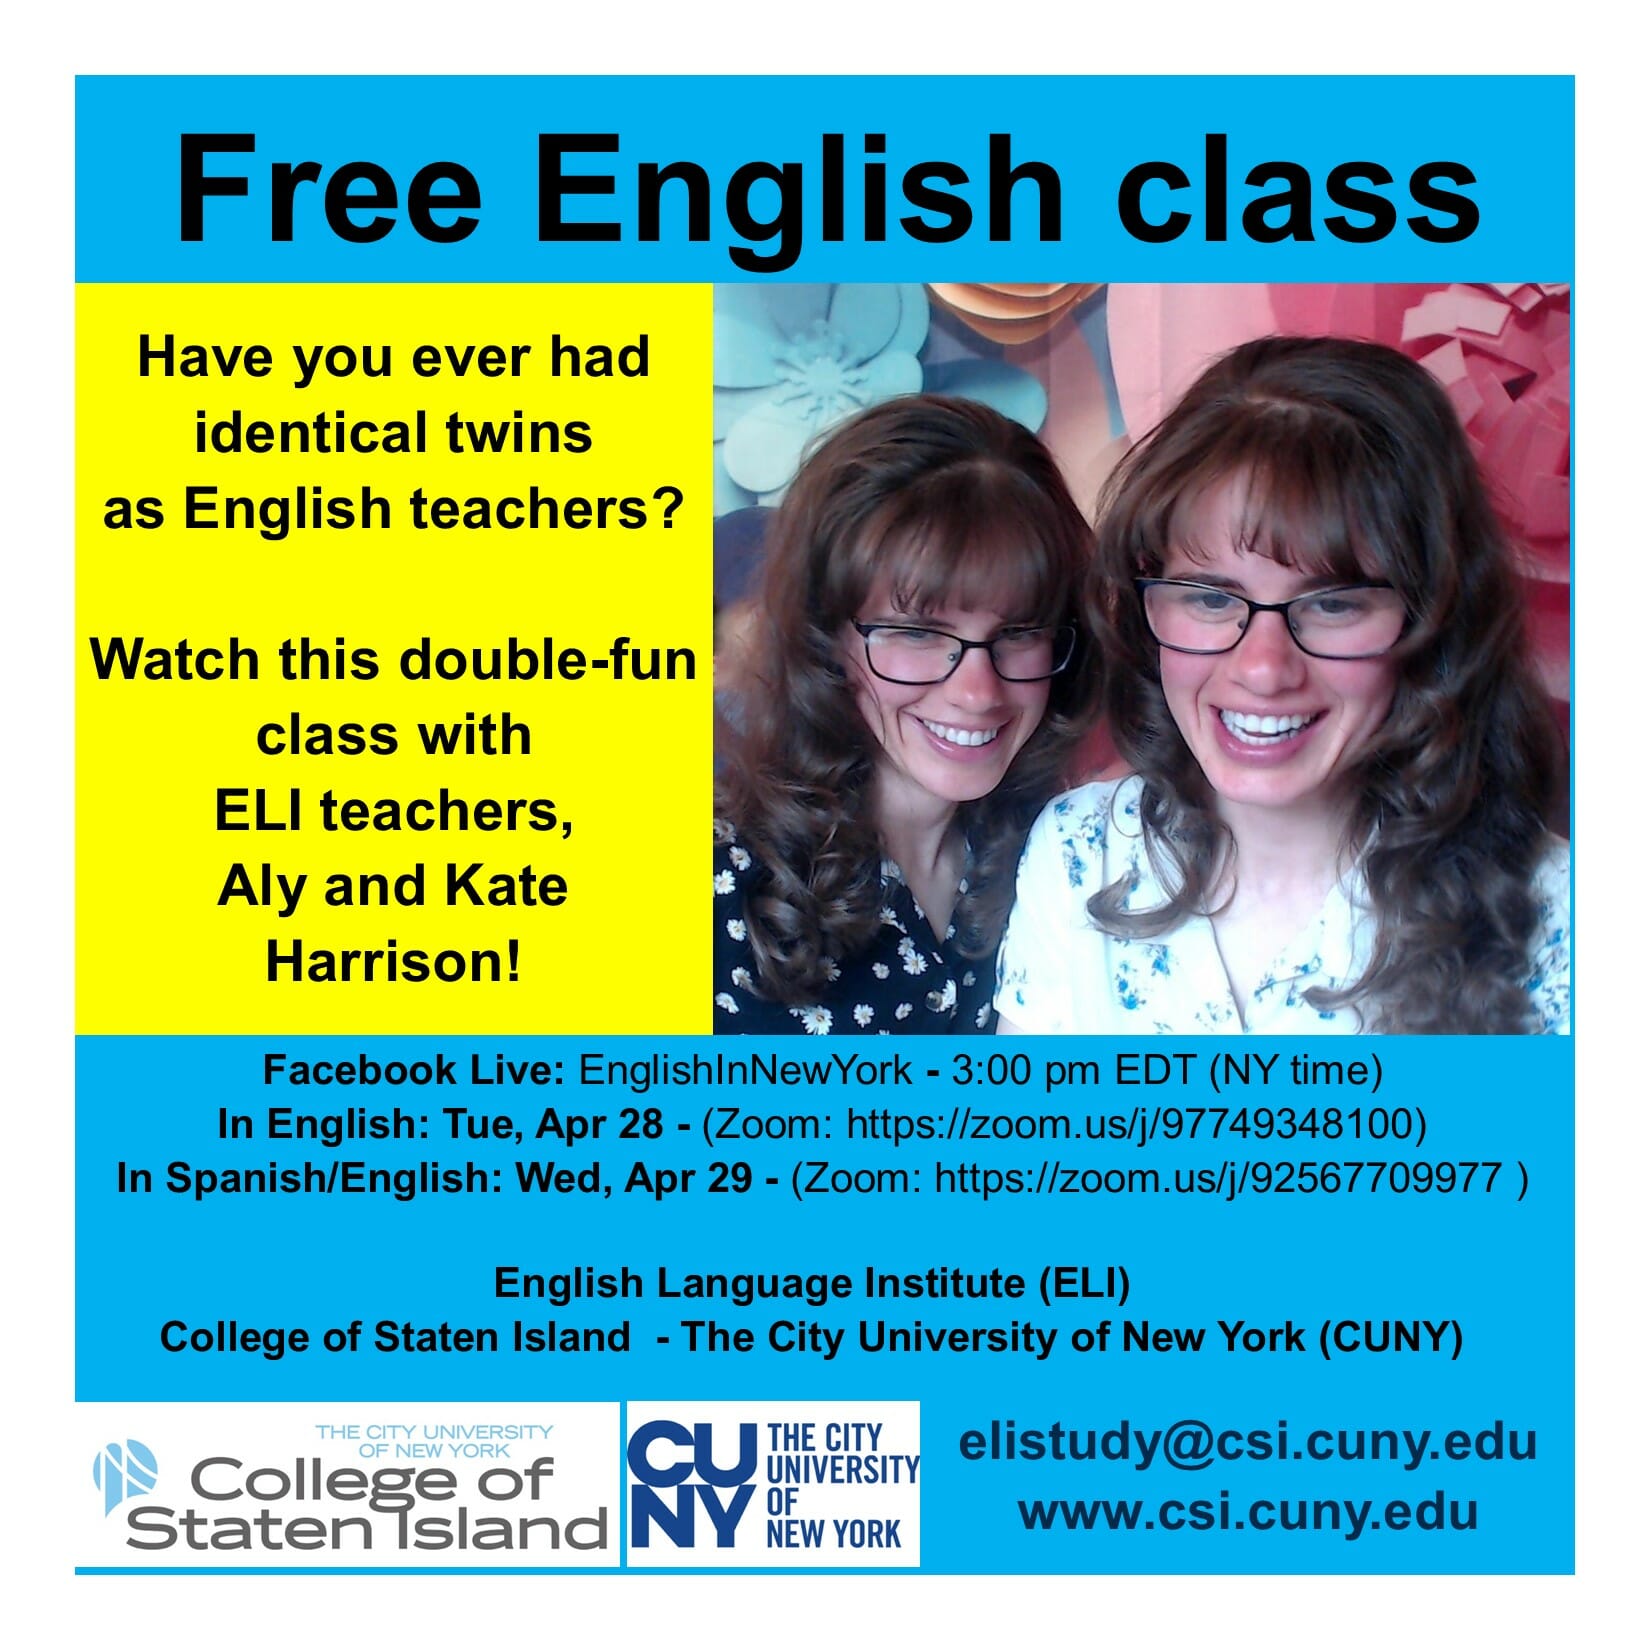 free-online-english-classes-with-the-english-language-institute-csi-today